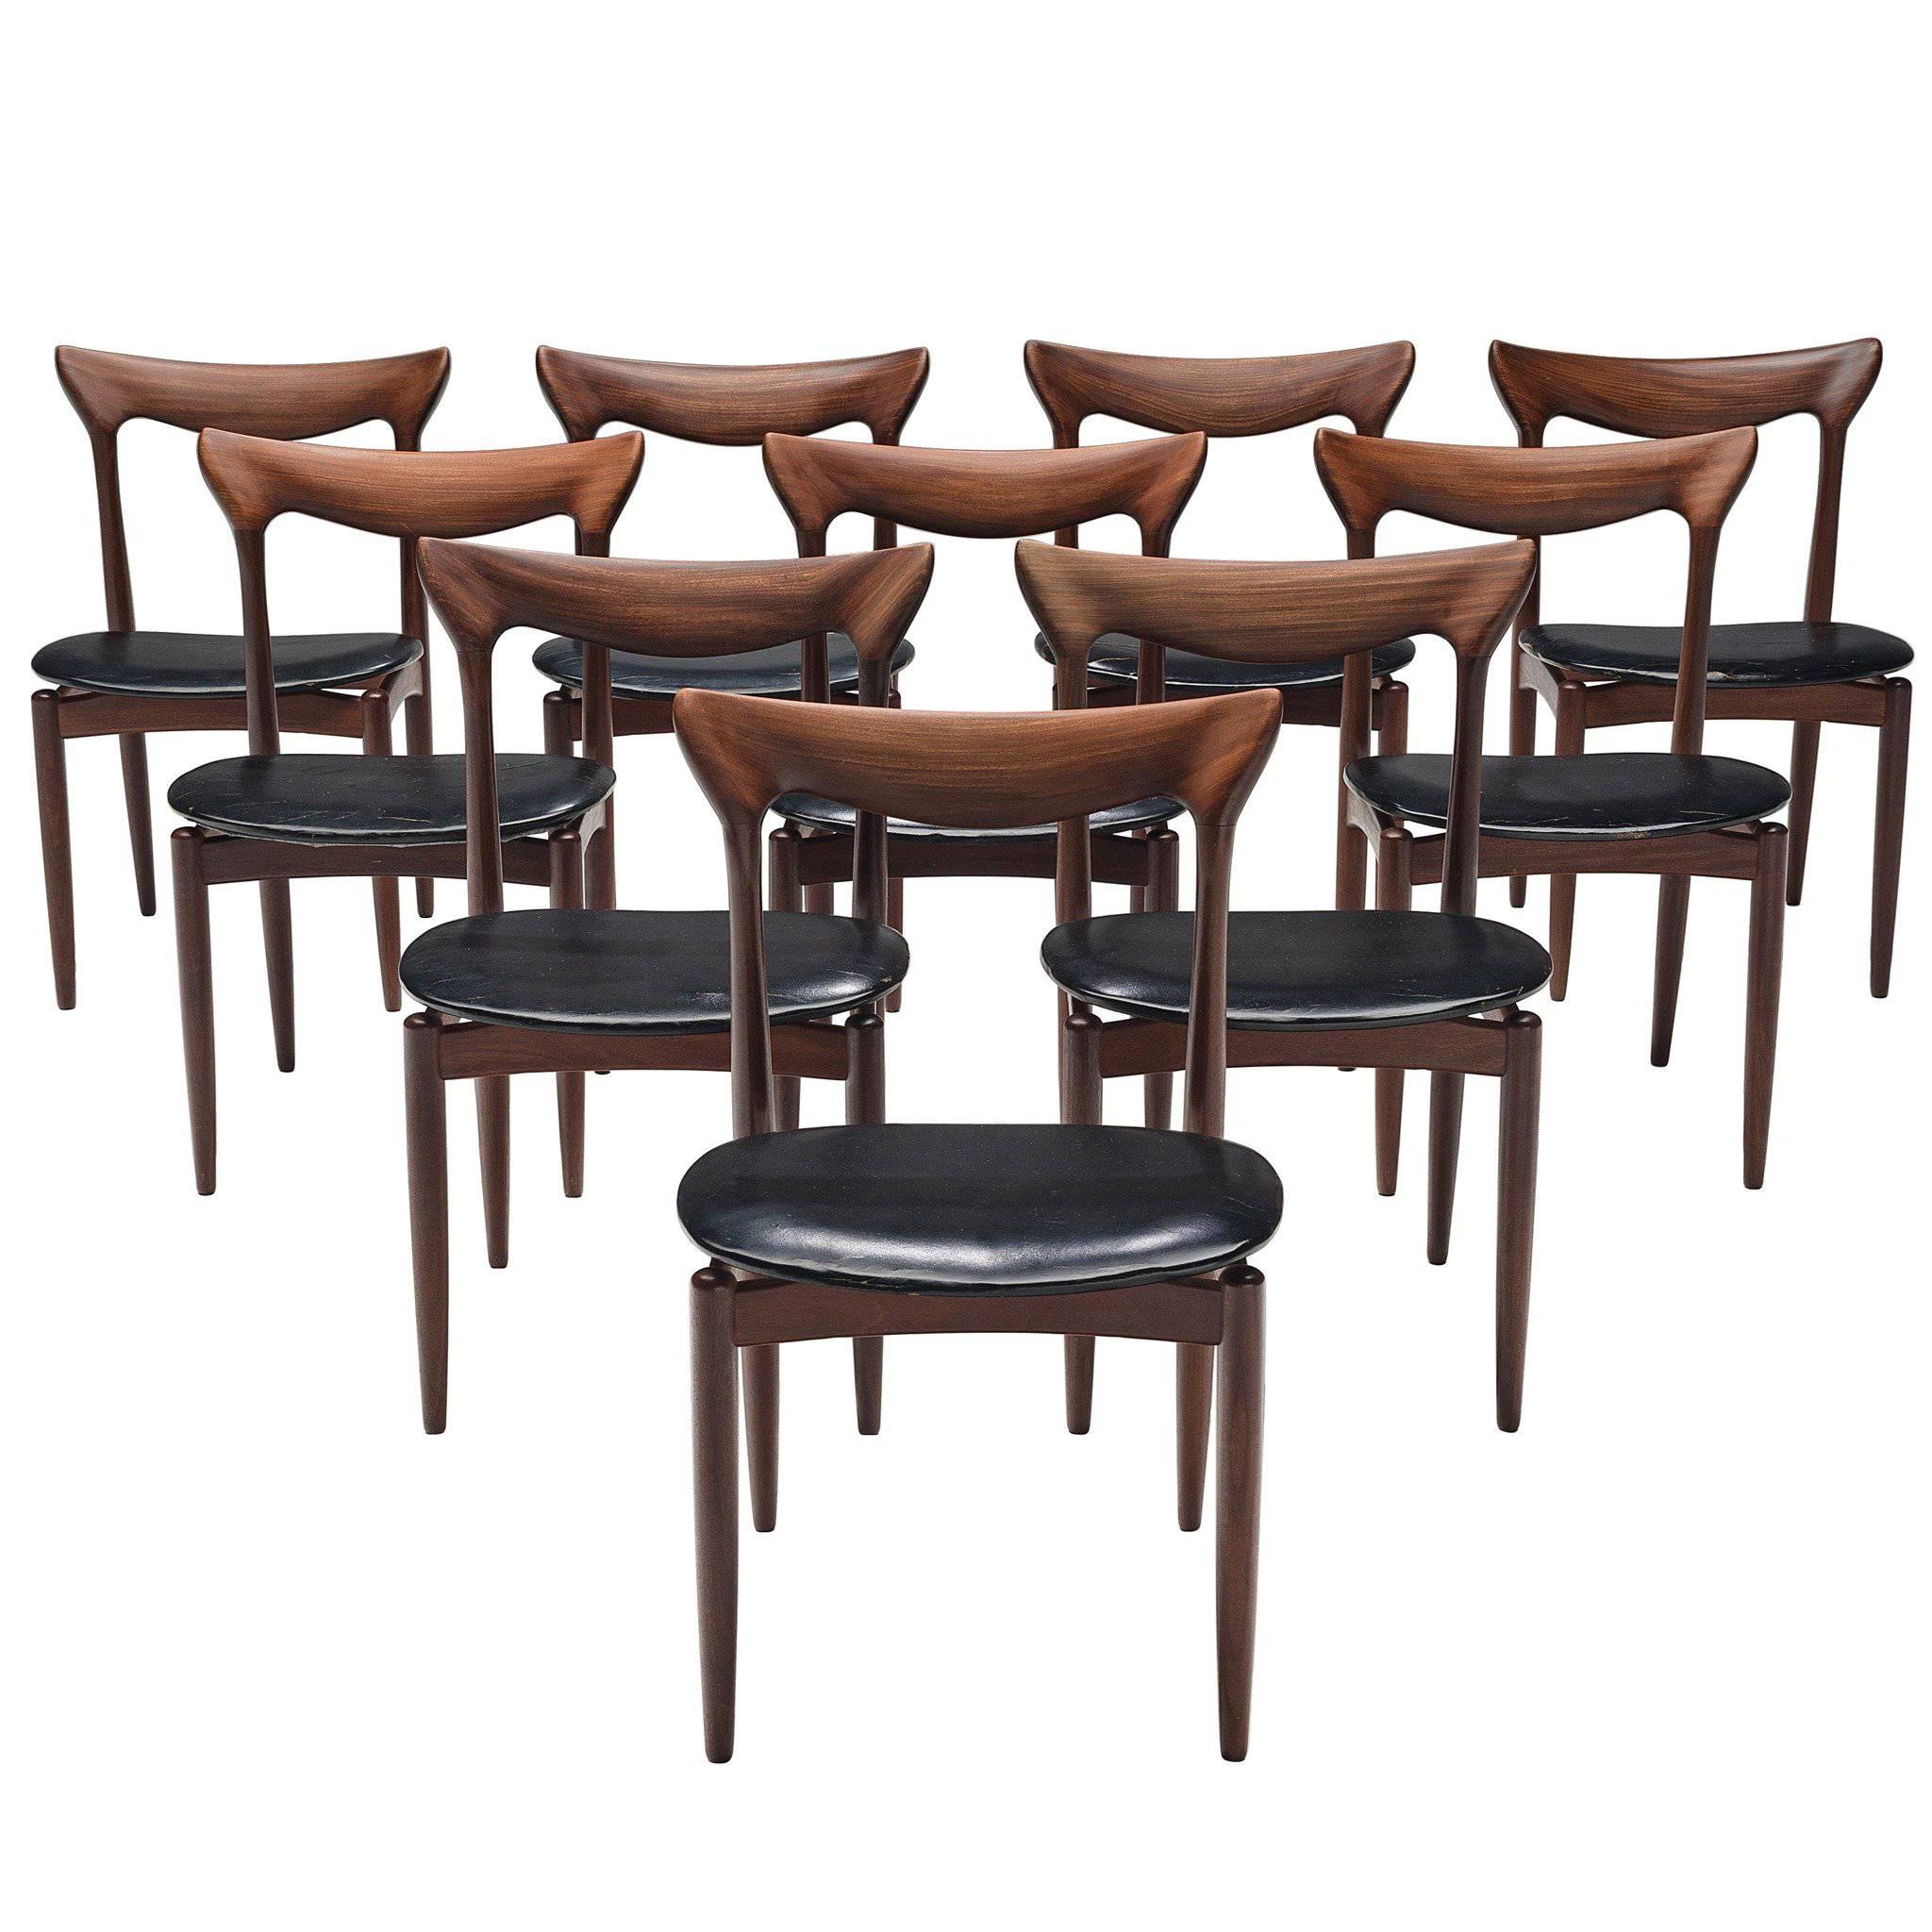 Set of Ten Dining Chairs by H.W. Klein in Mahogany